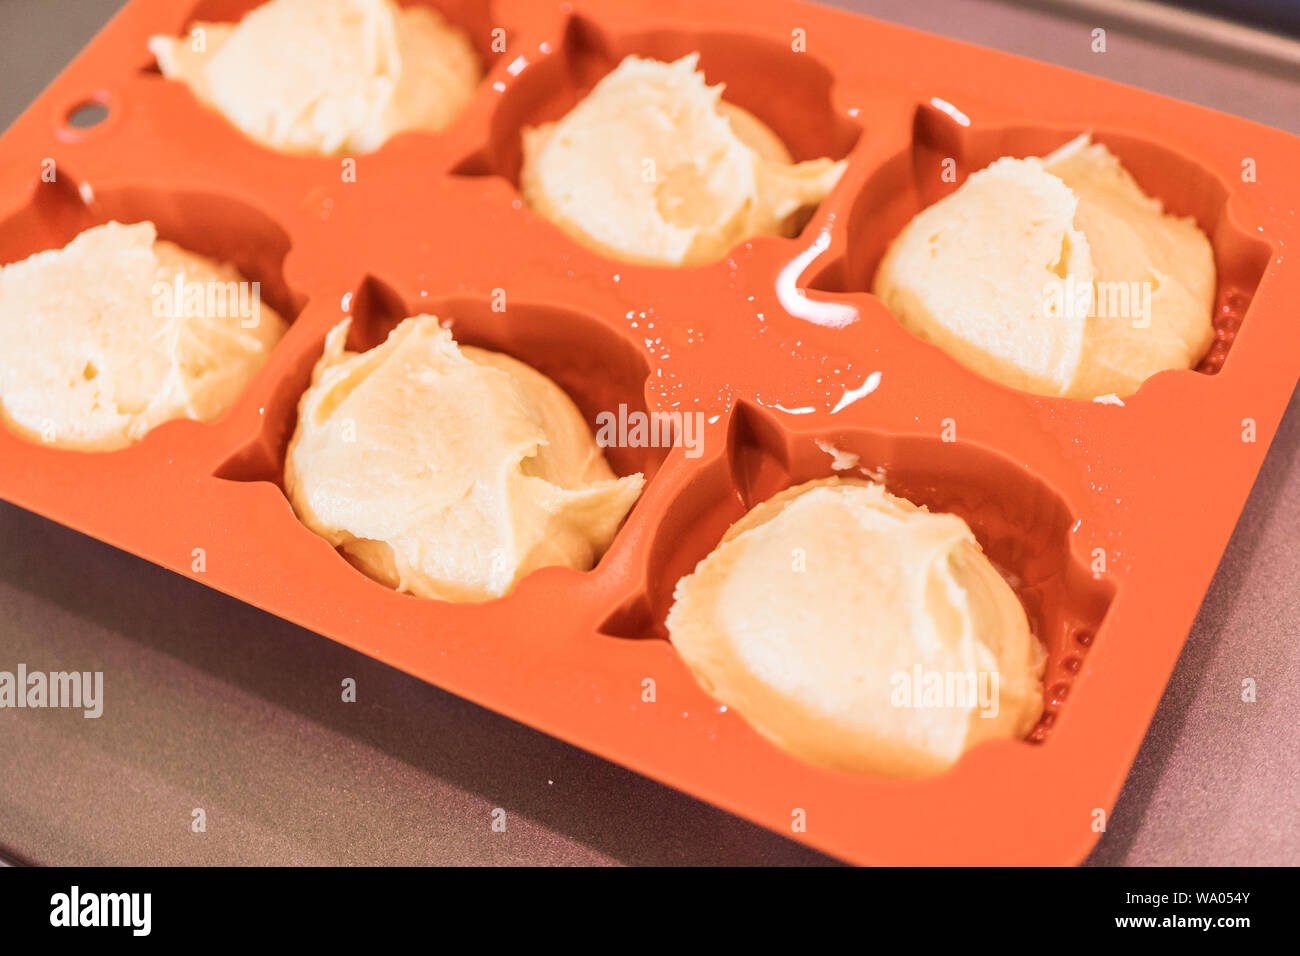 https://c8.alamy.com/comp/WA054Y/baking-mini-pound-cakes-in-silicone-molds-shaped-as-on-owls-WA054Y.jpg